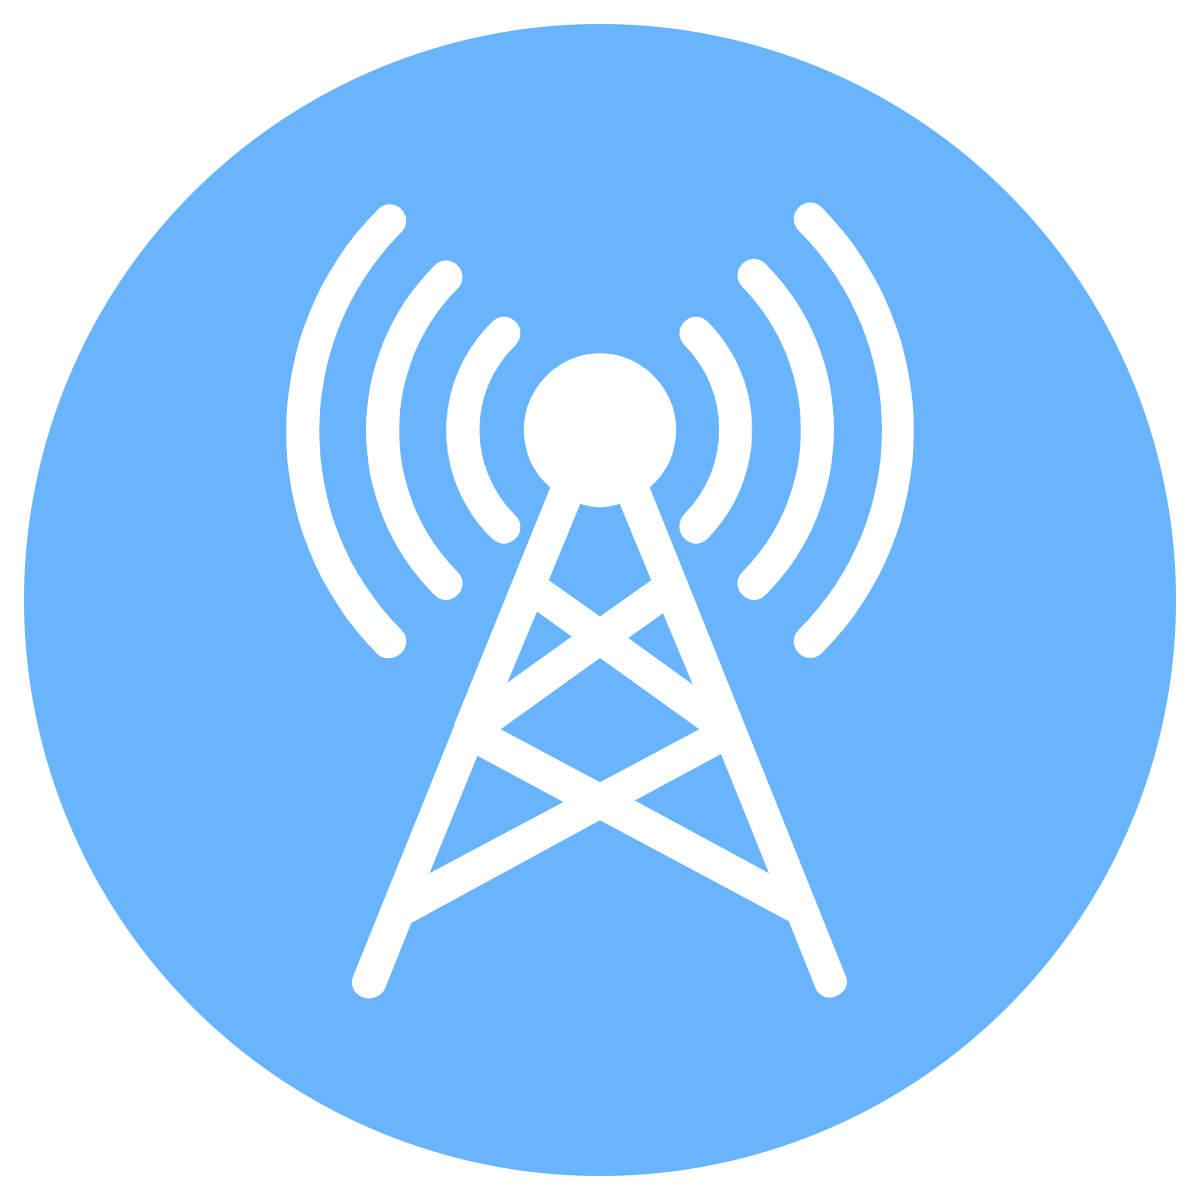 Wireless tower icon